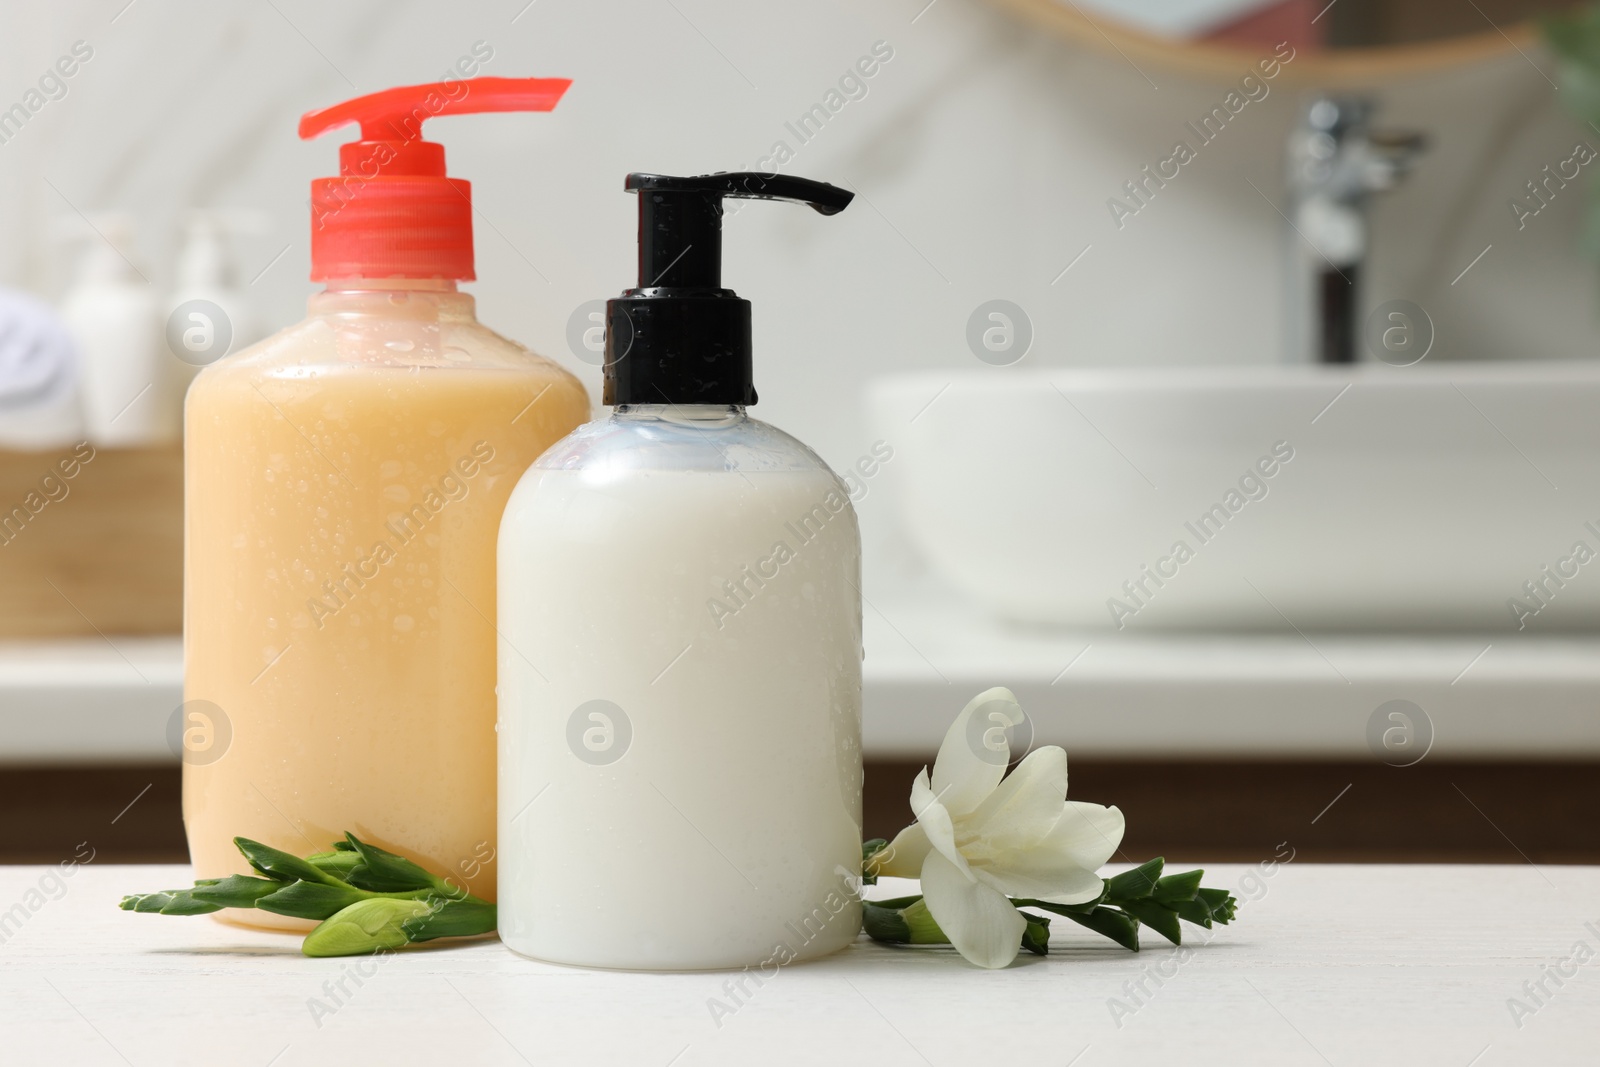 Photo of Dispensers of liquid soap and freesia flower on white table in bathroom, space for text